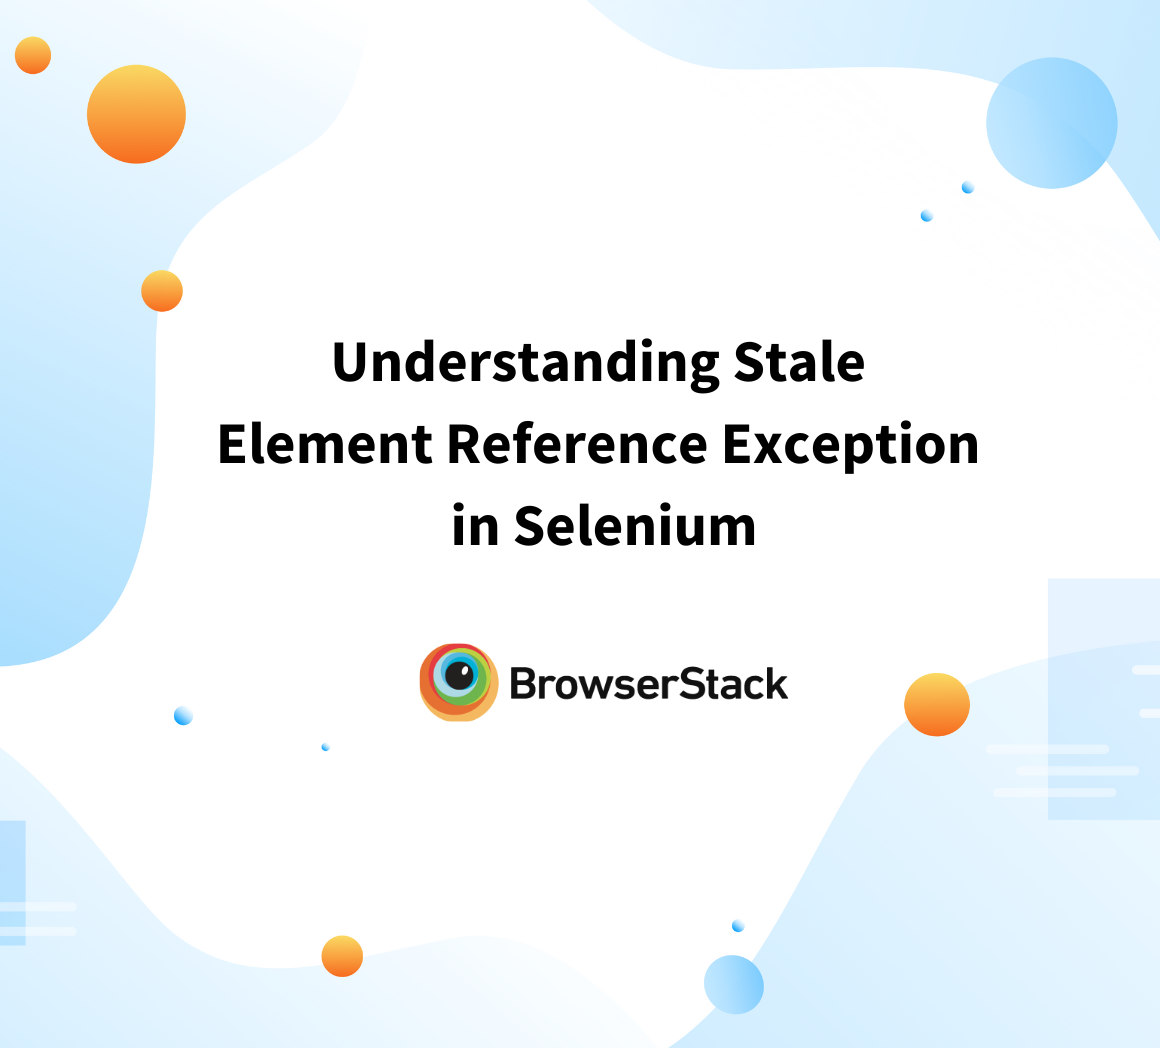 Understanding Stale Element Reference Exception in Selenium